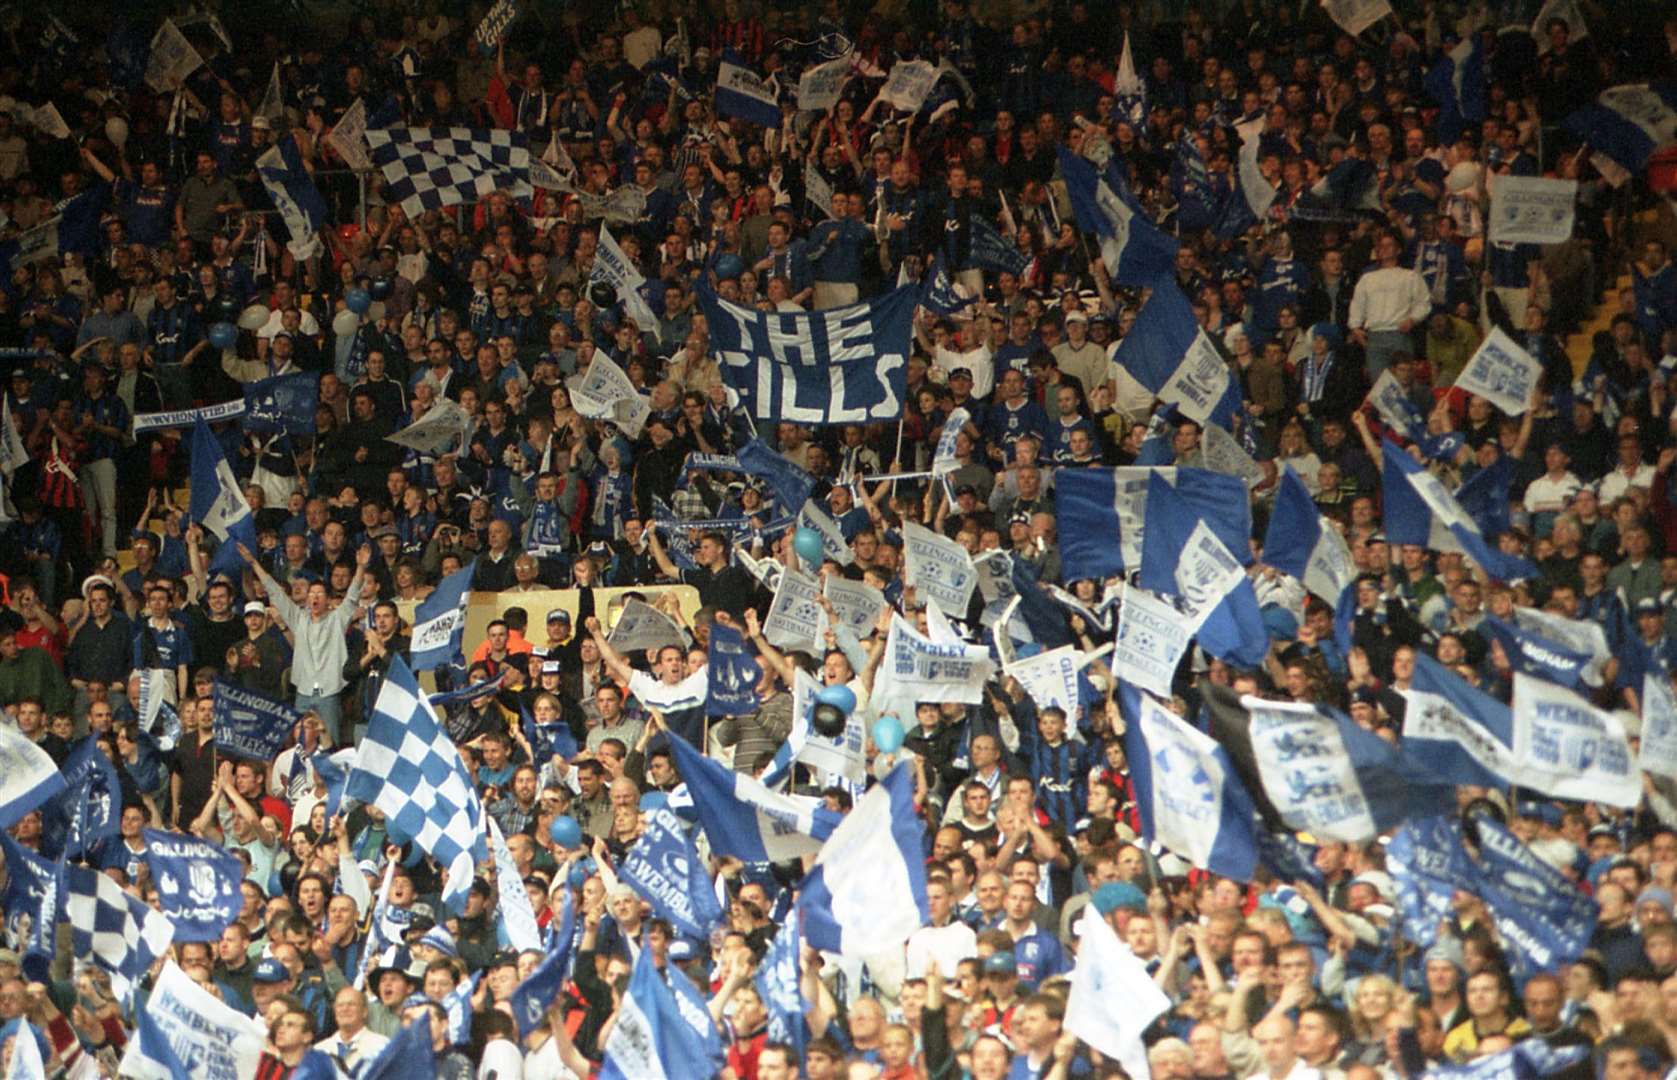 Gillingham fans at Wembley for the play-off final against Manchester City in 1999.